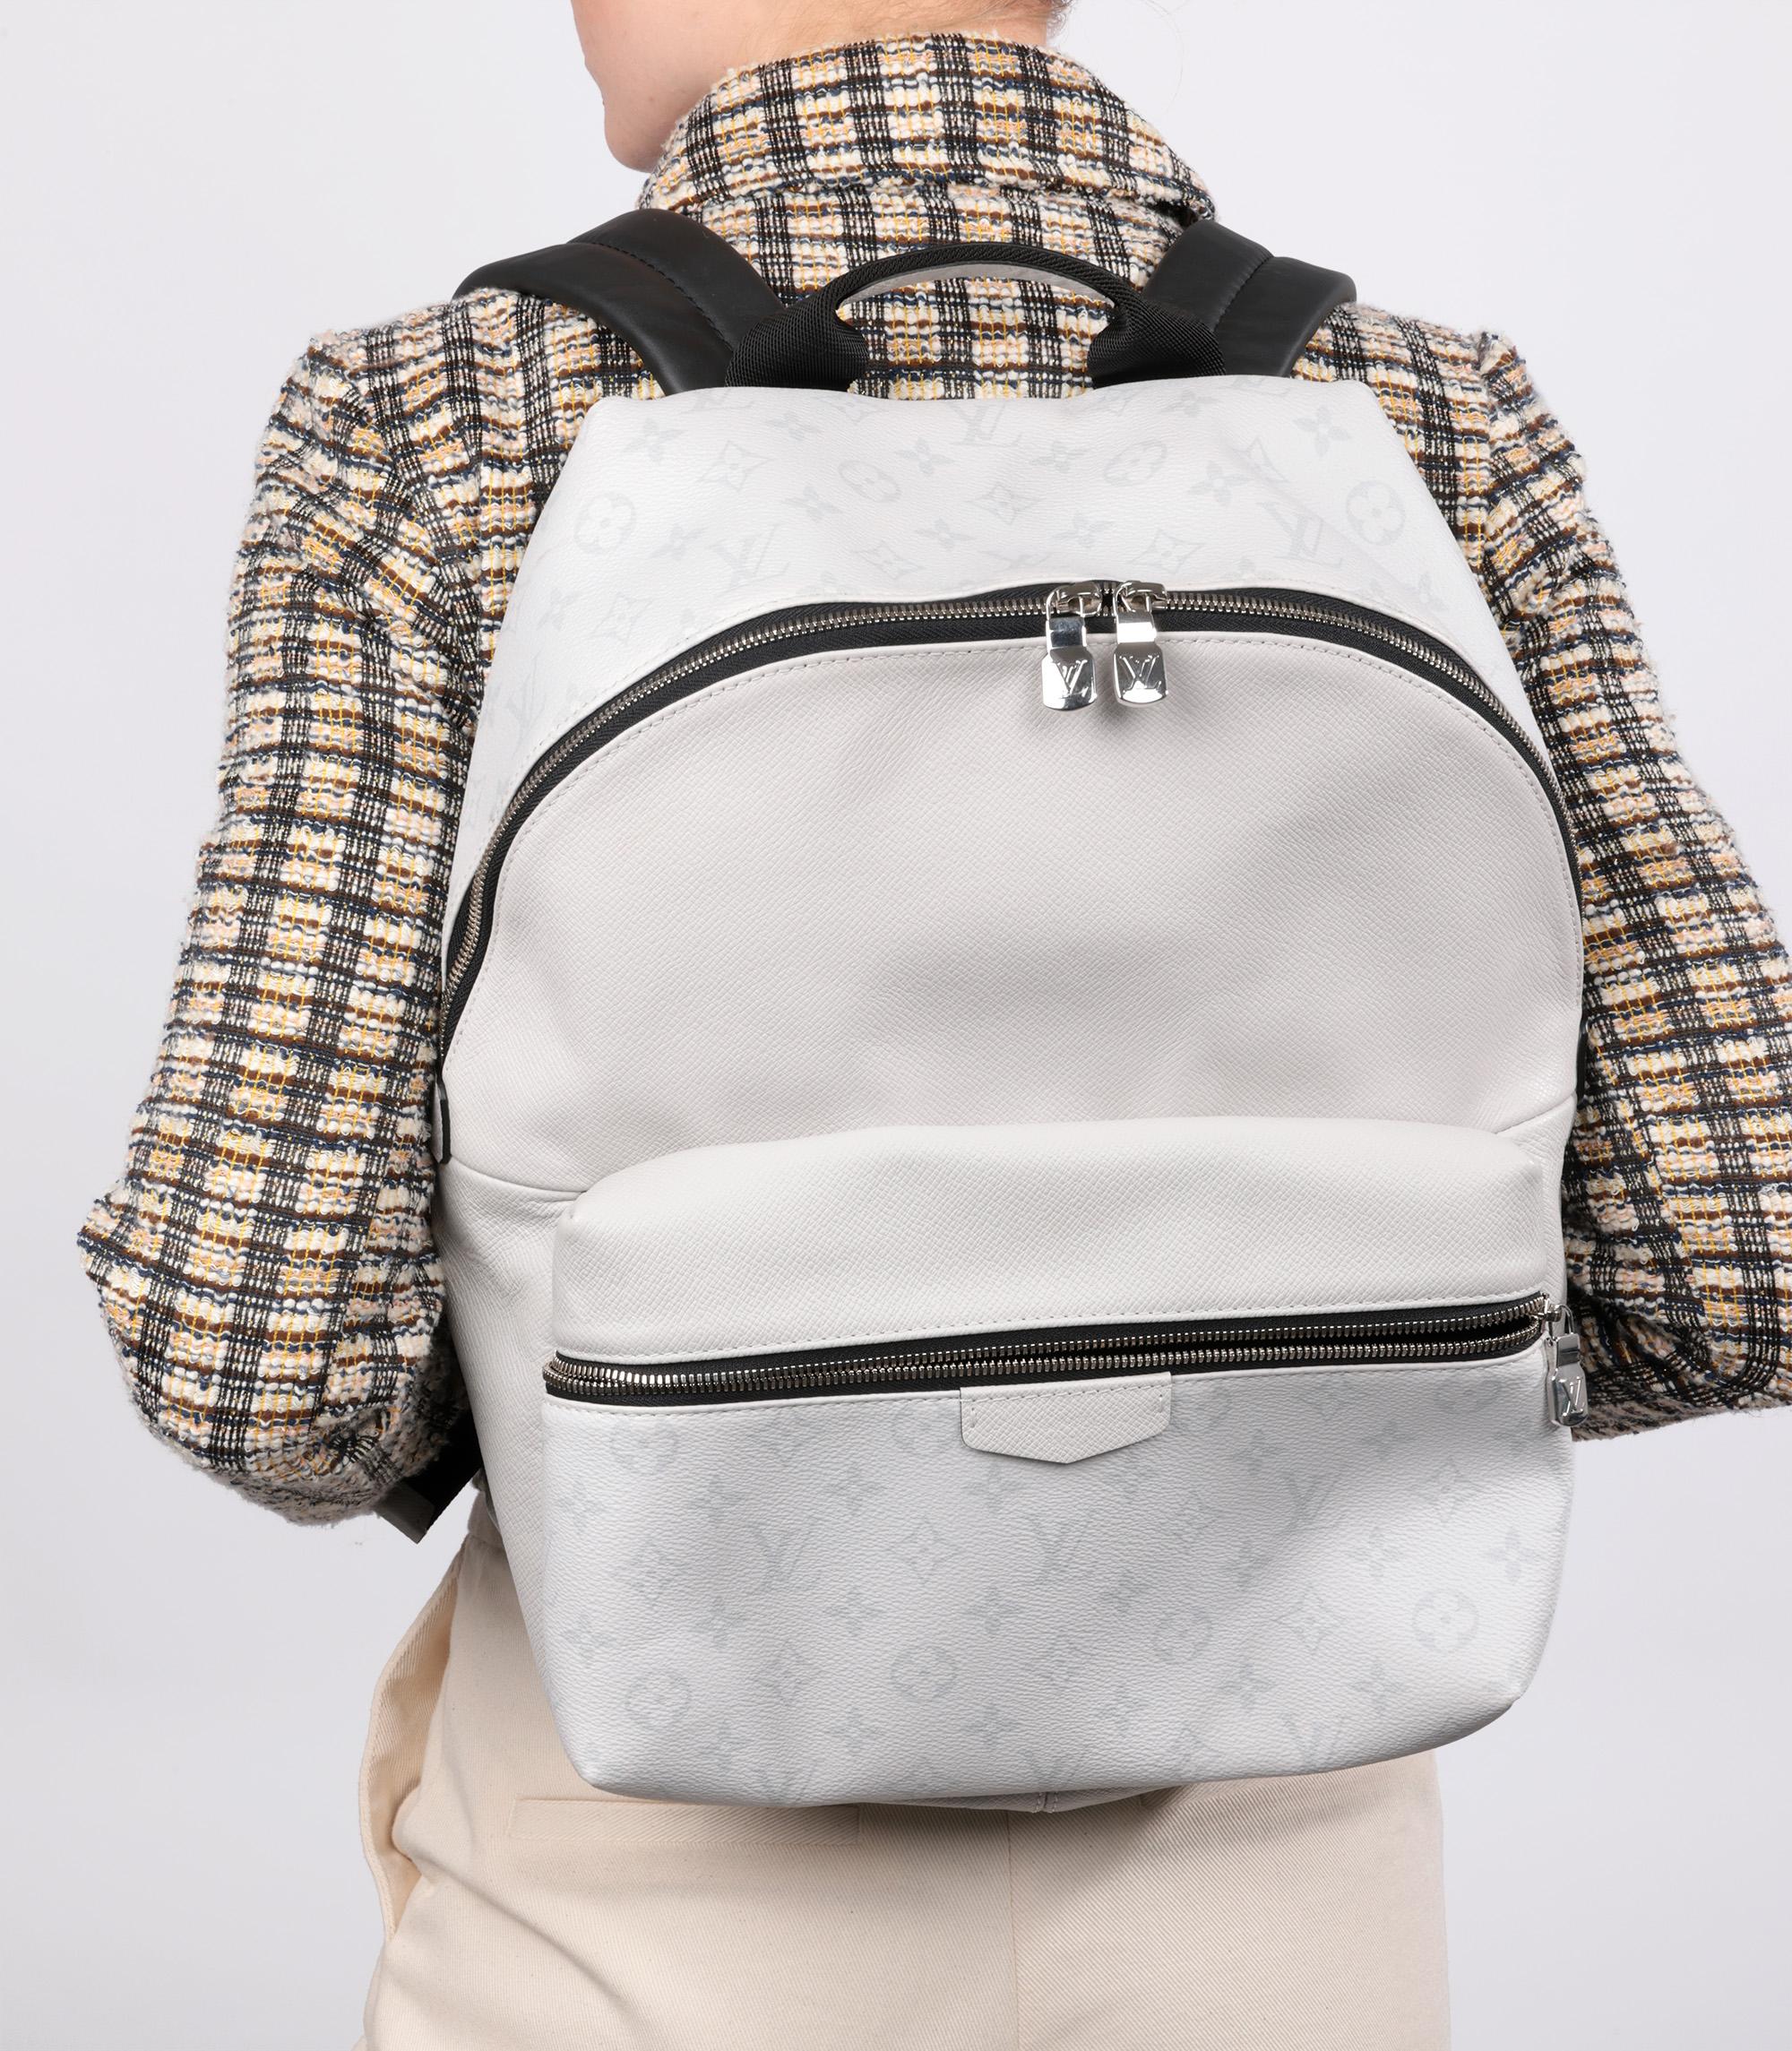 Louis Vuitton Optic White Coated Canvas & Taiga Leder Virgil Abloh Discovery Rucksack

Marke - Louis Vuitton
Modell- Discovery Rucksack
Produkttyp- Rucksack
Alter- Circa 2022
Begleitet von- Louis Vuitton Staubsaugerbeutel
Farbe - Weiß
Hardware-